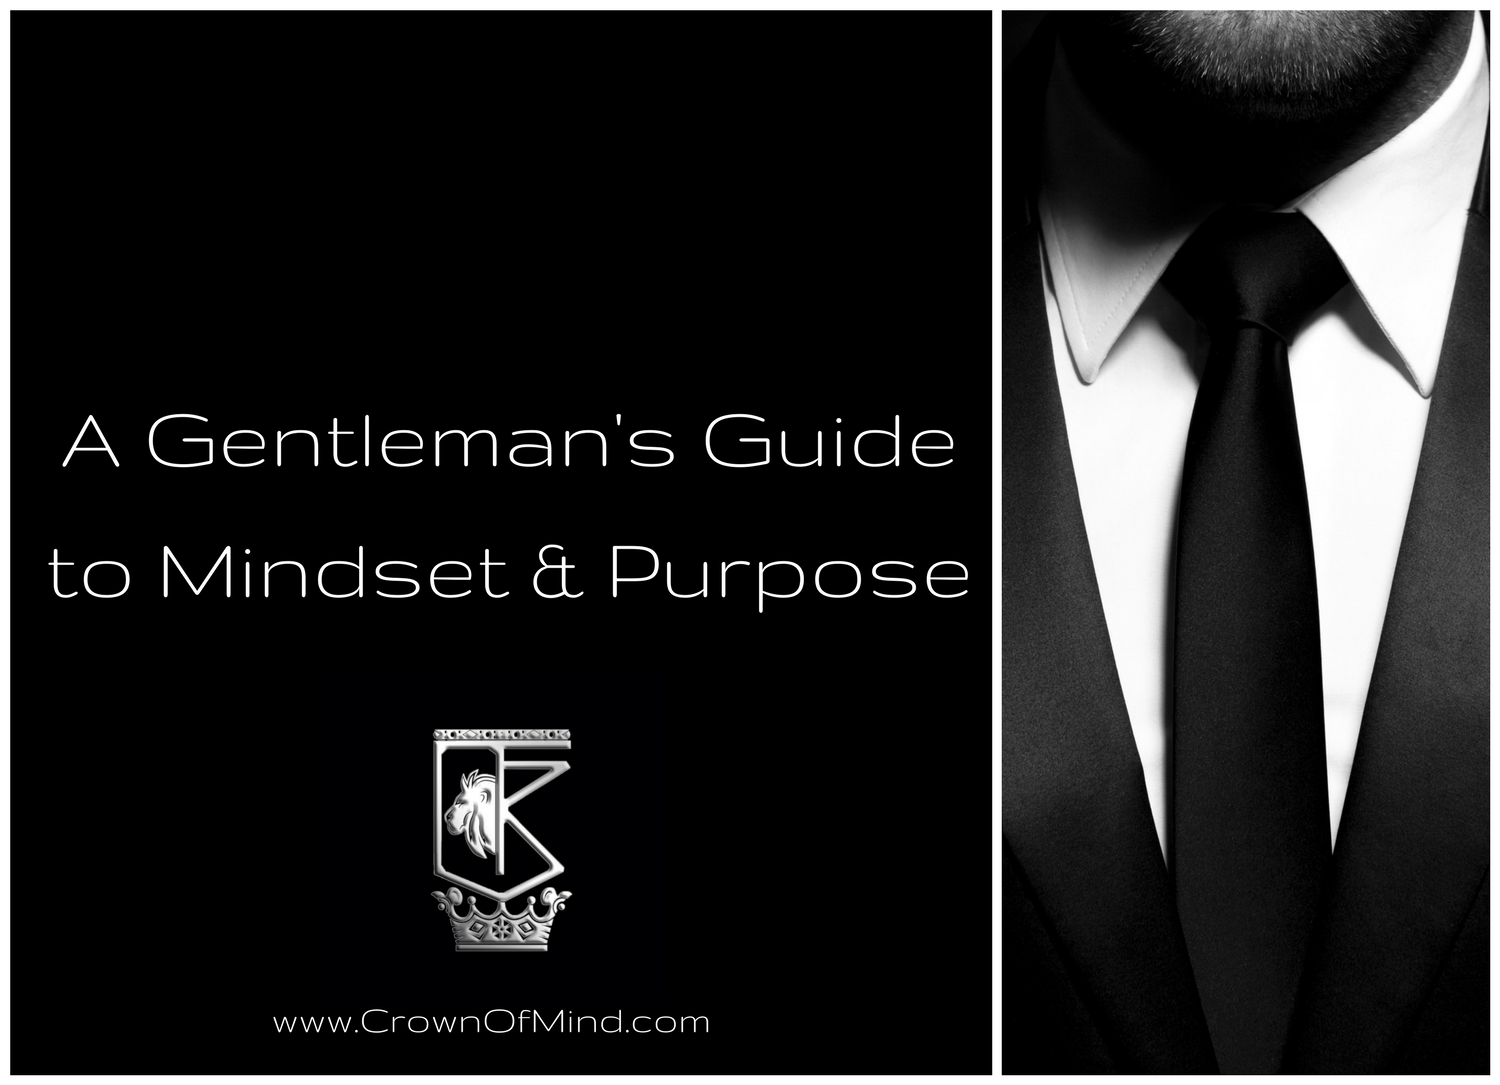 A Gentleman’s Guide to Mindset & Purpose